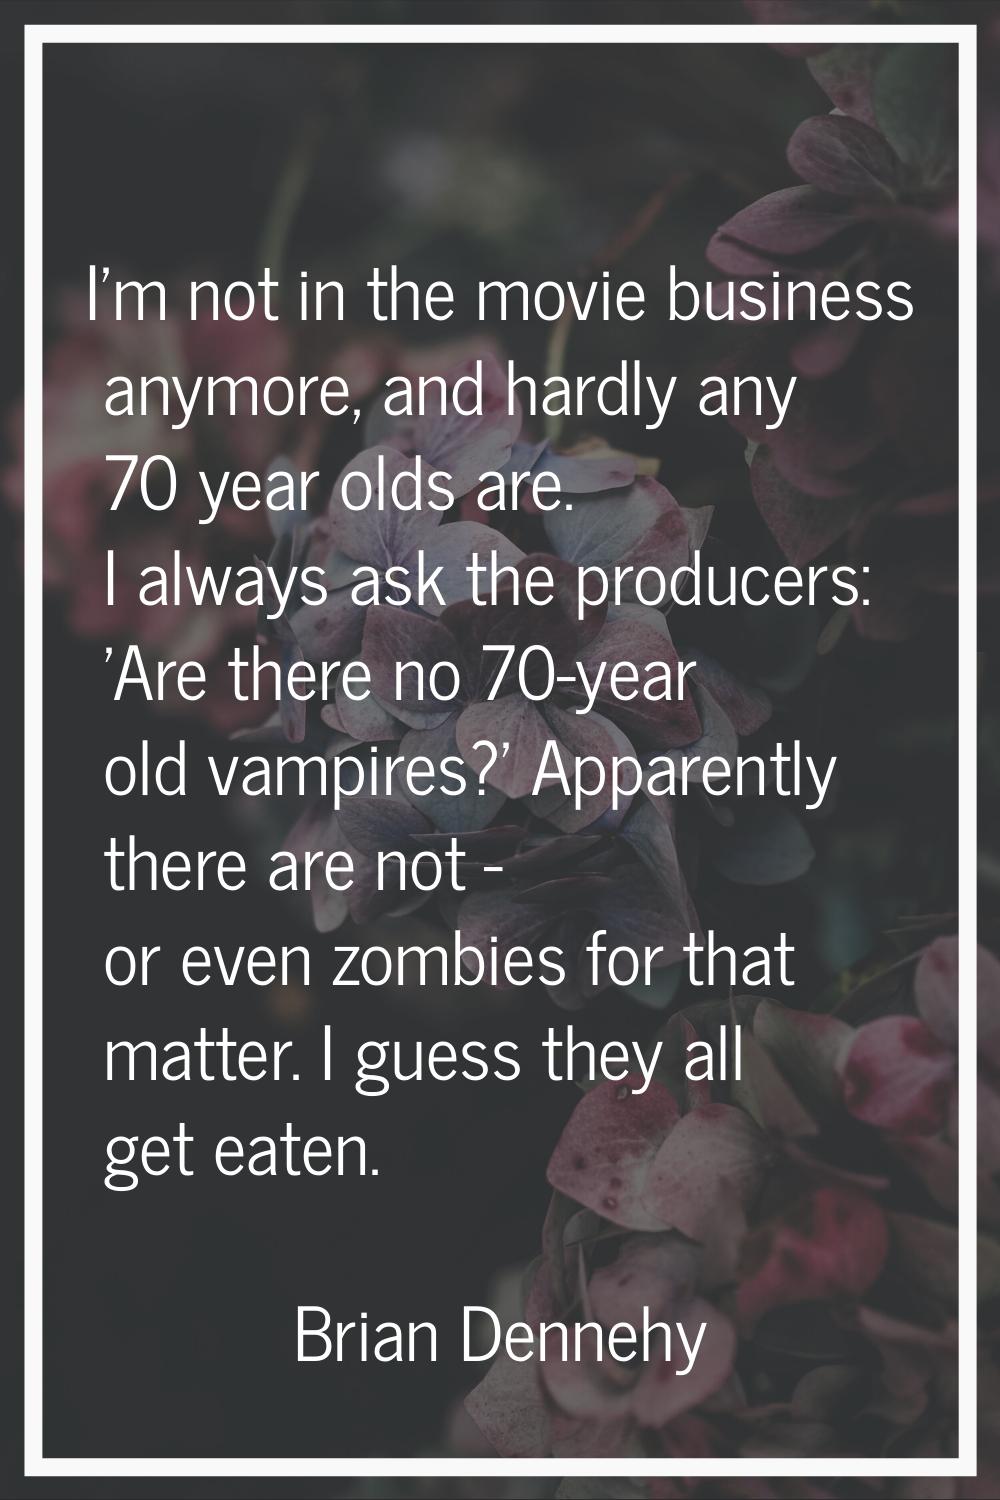 I'm not in the movie business anymore, and hardly any 70 year olds are. I always ask the producers: